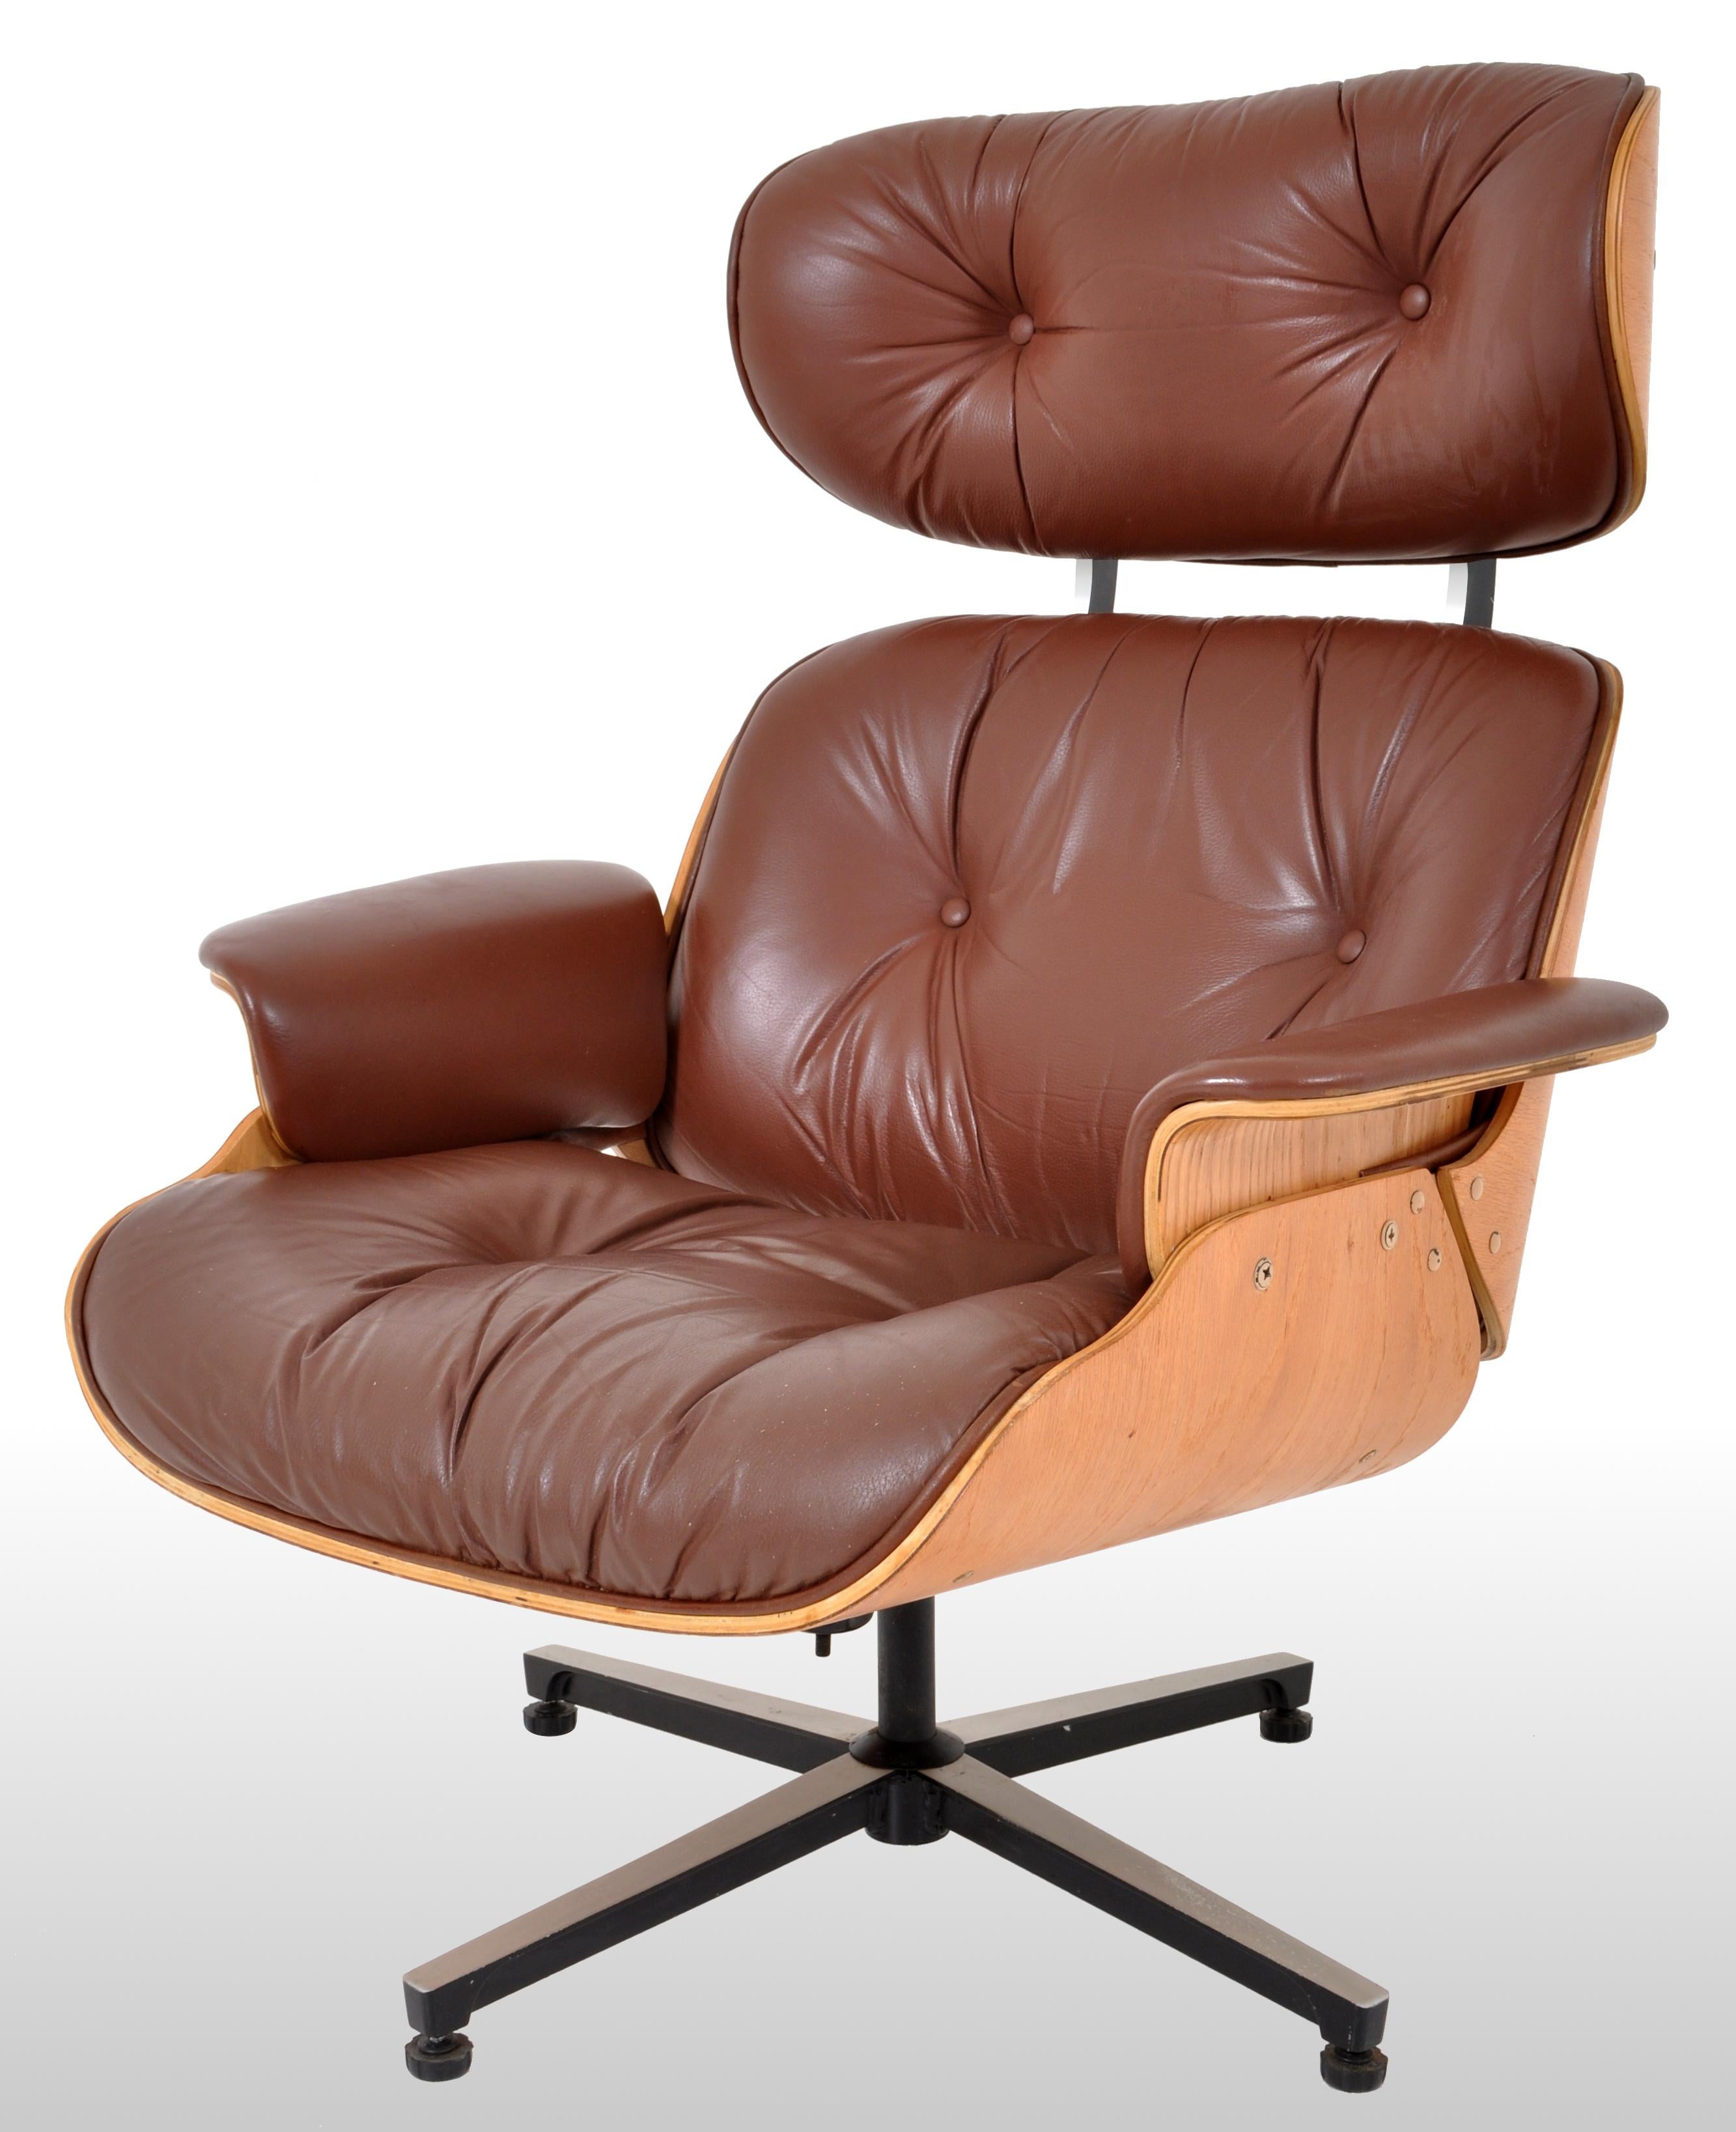 20th Century Mid-Century Modern Plycraft Eames 670/71 Lounge Chair Recliner and Ottoman 1960s